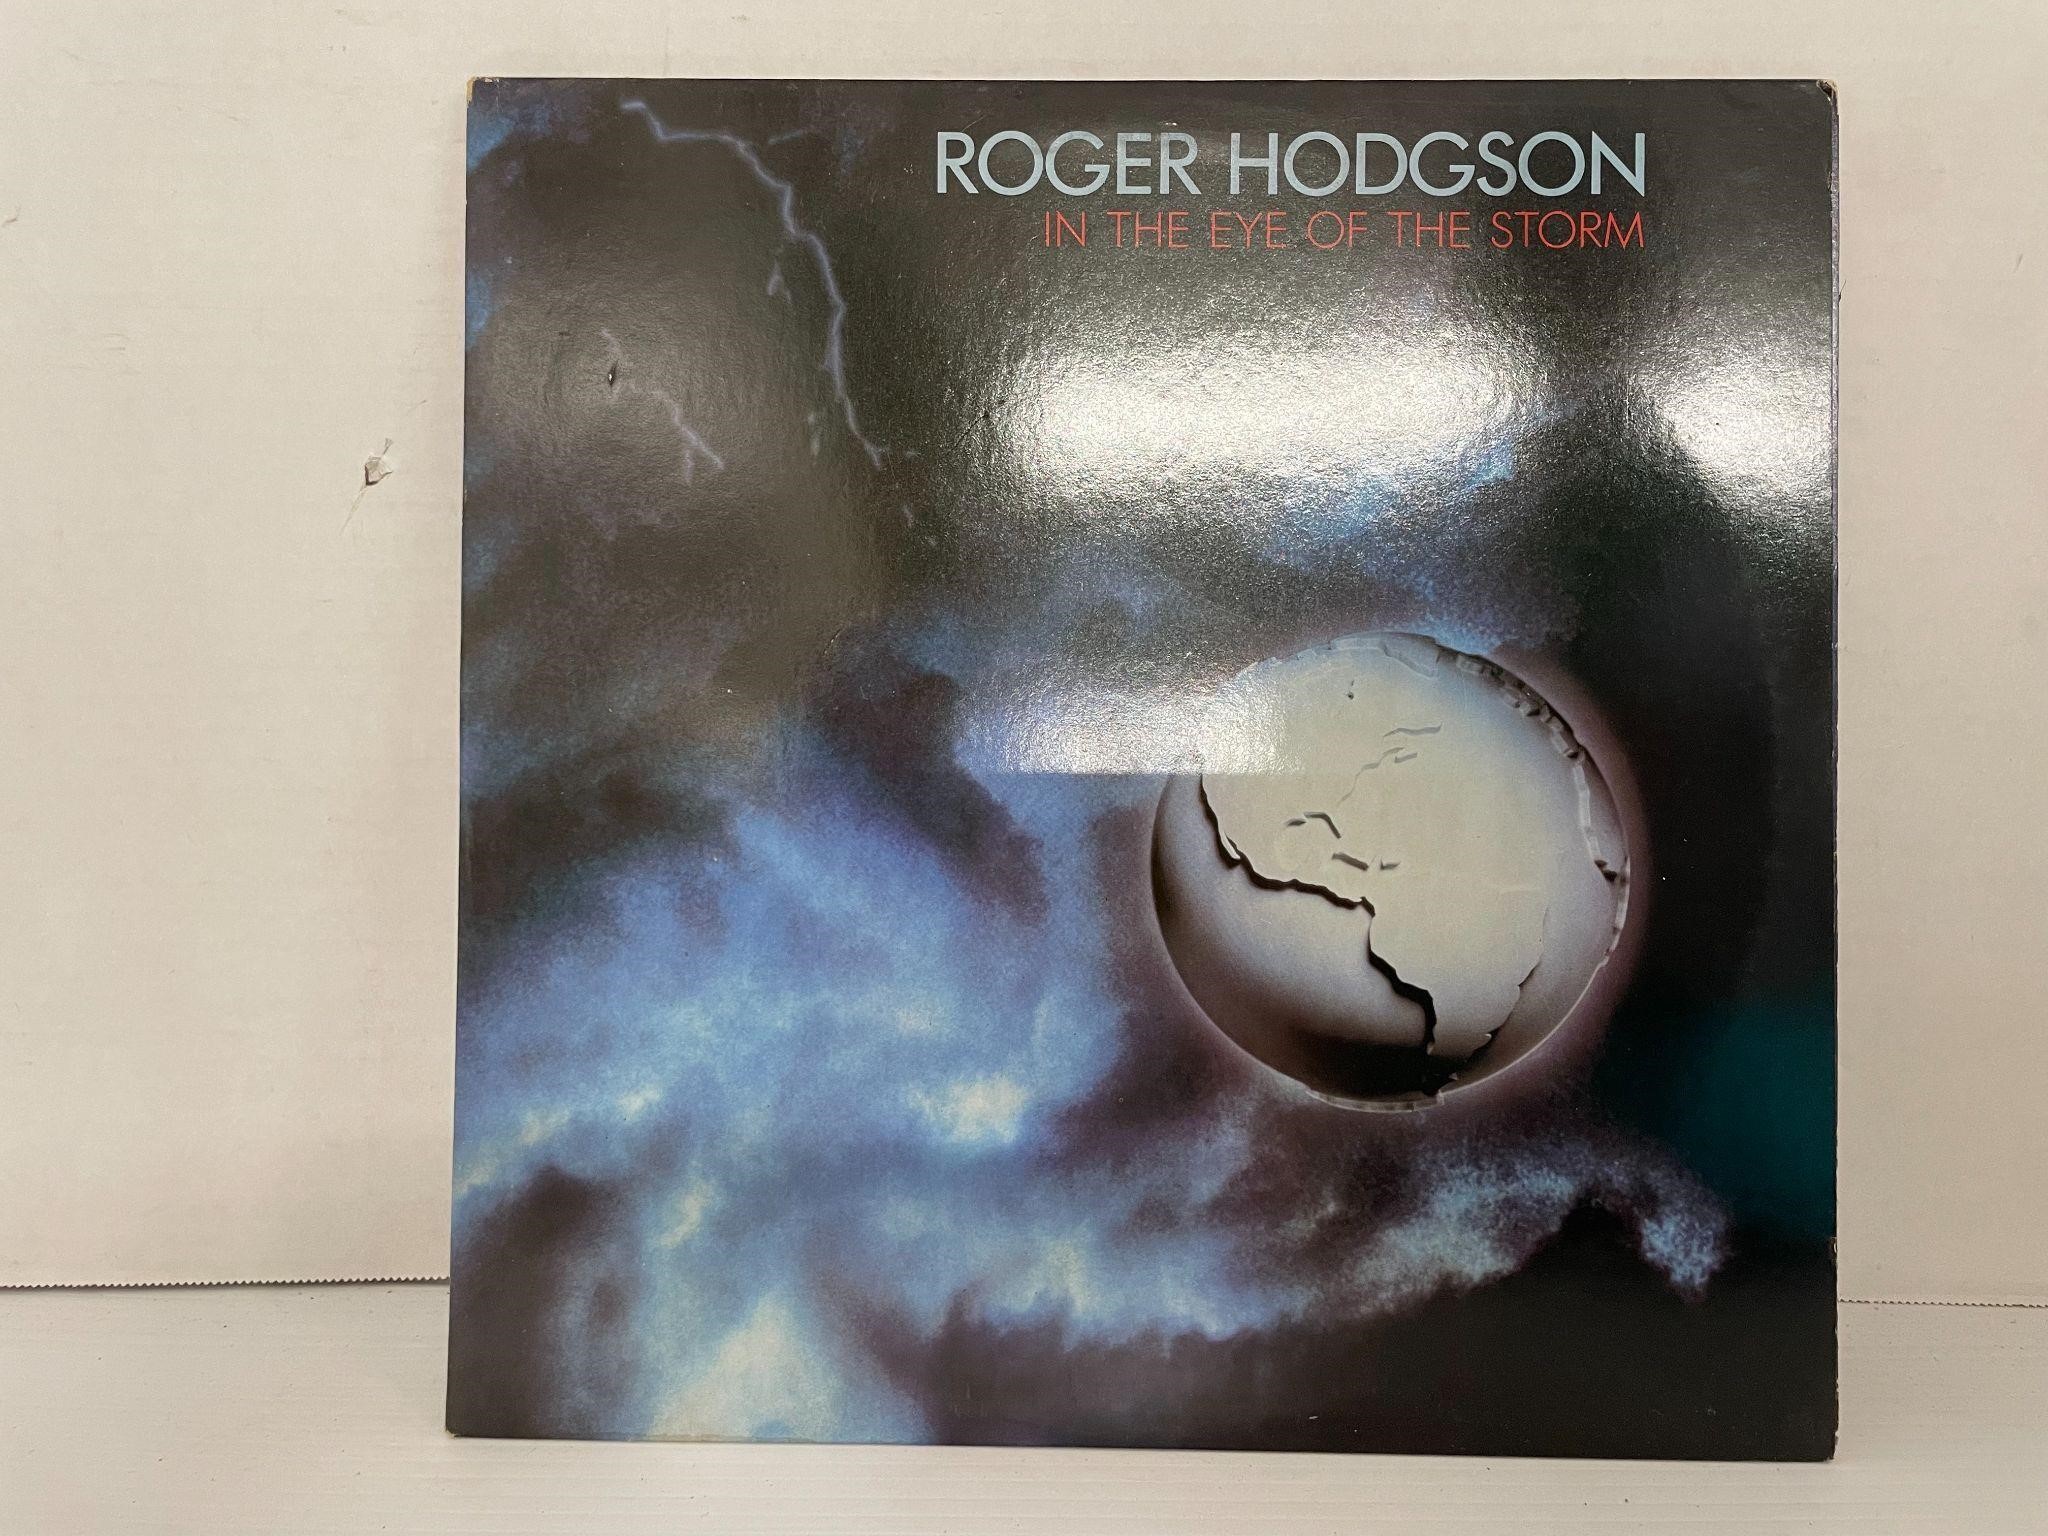 Roger Hodgson In the Eye of the Storm